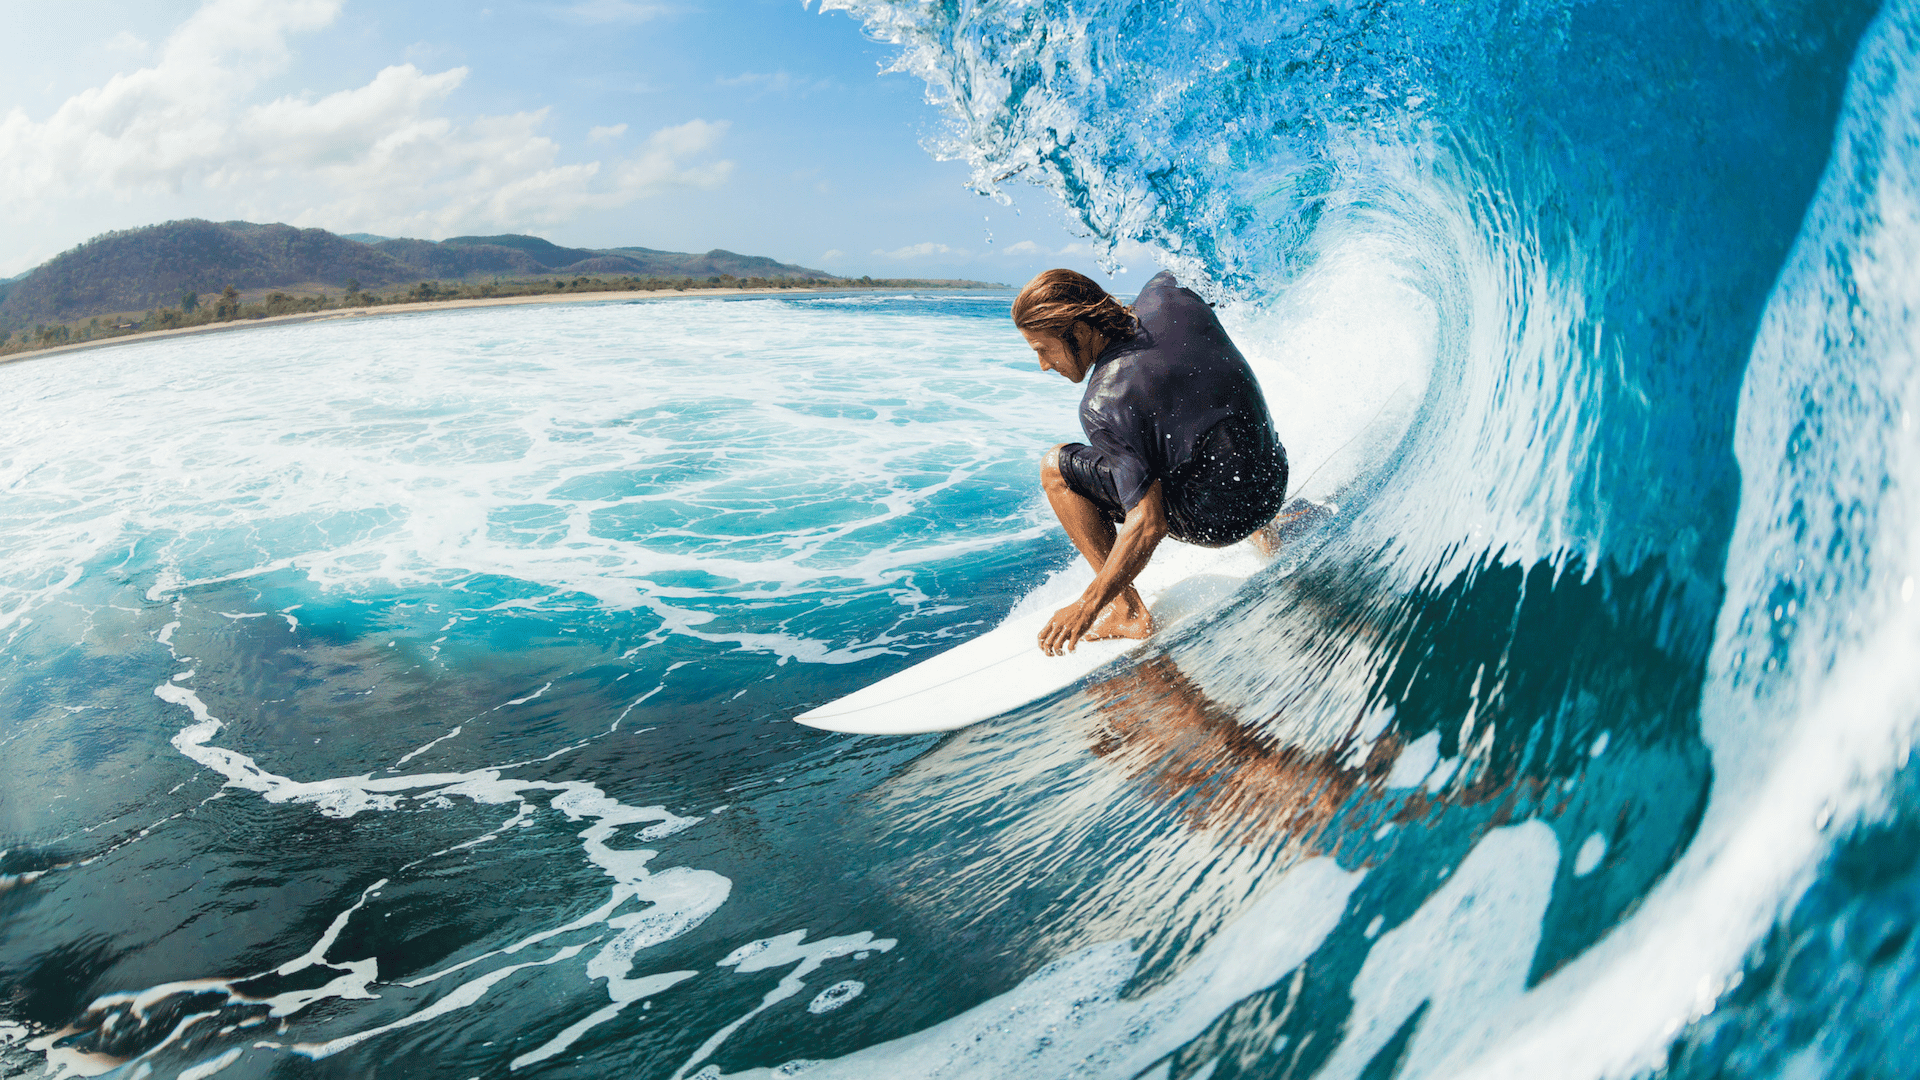 What type of danger one can face during surfing?